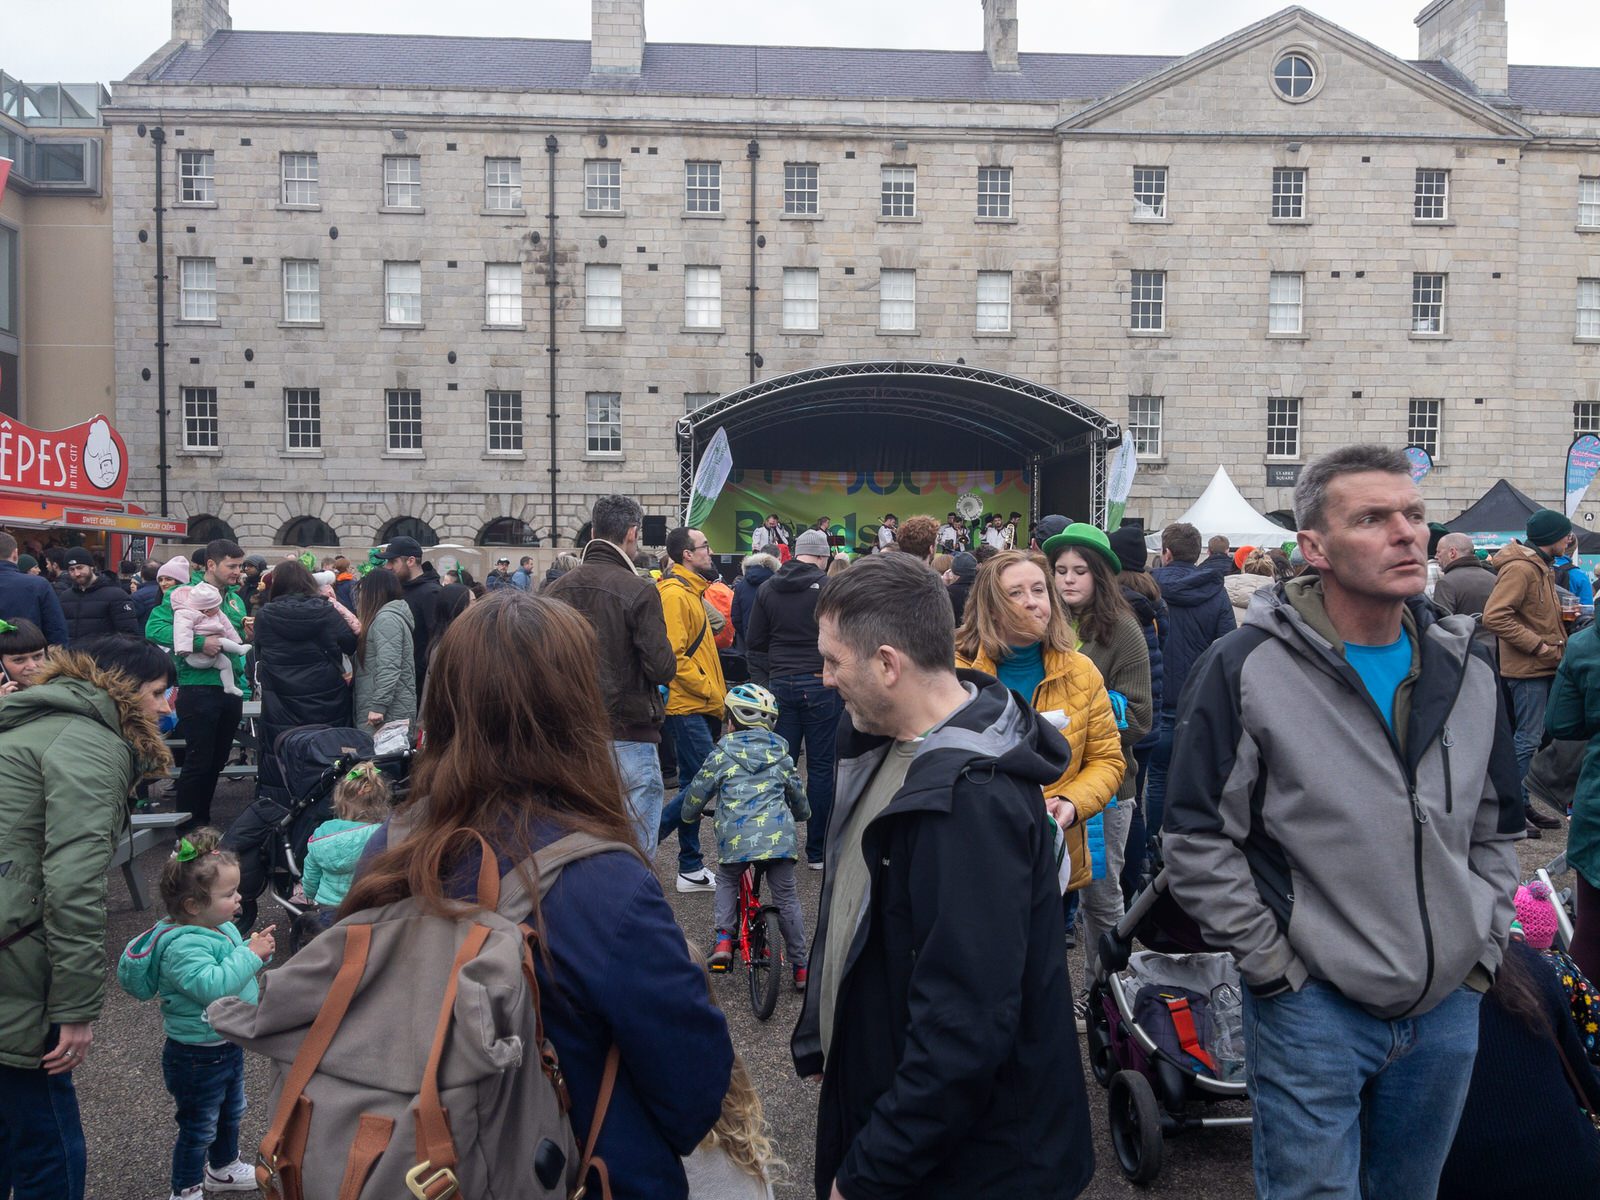 ST. PATRICK'S FESTIVAL QUARTER AT THE NATIONAL MUSEUM OF IRELAND 019